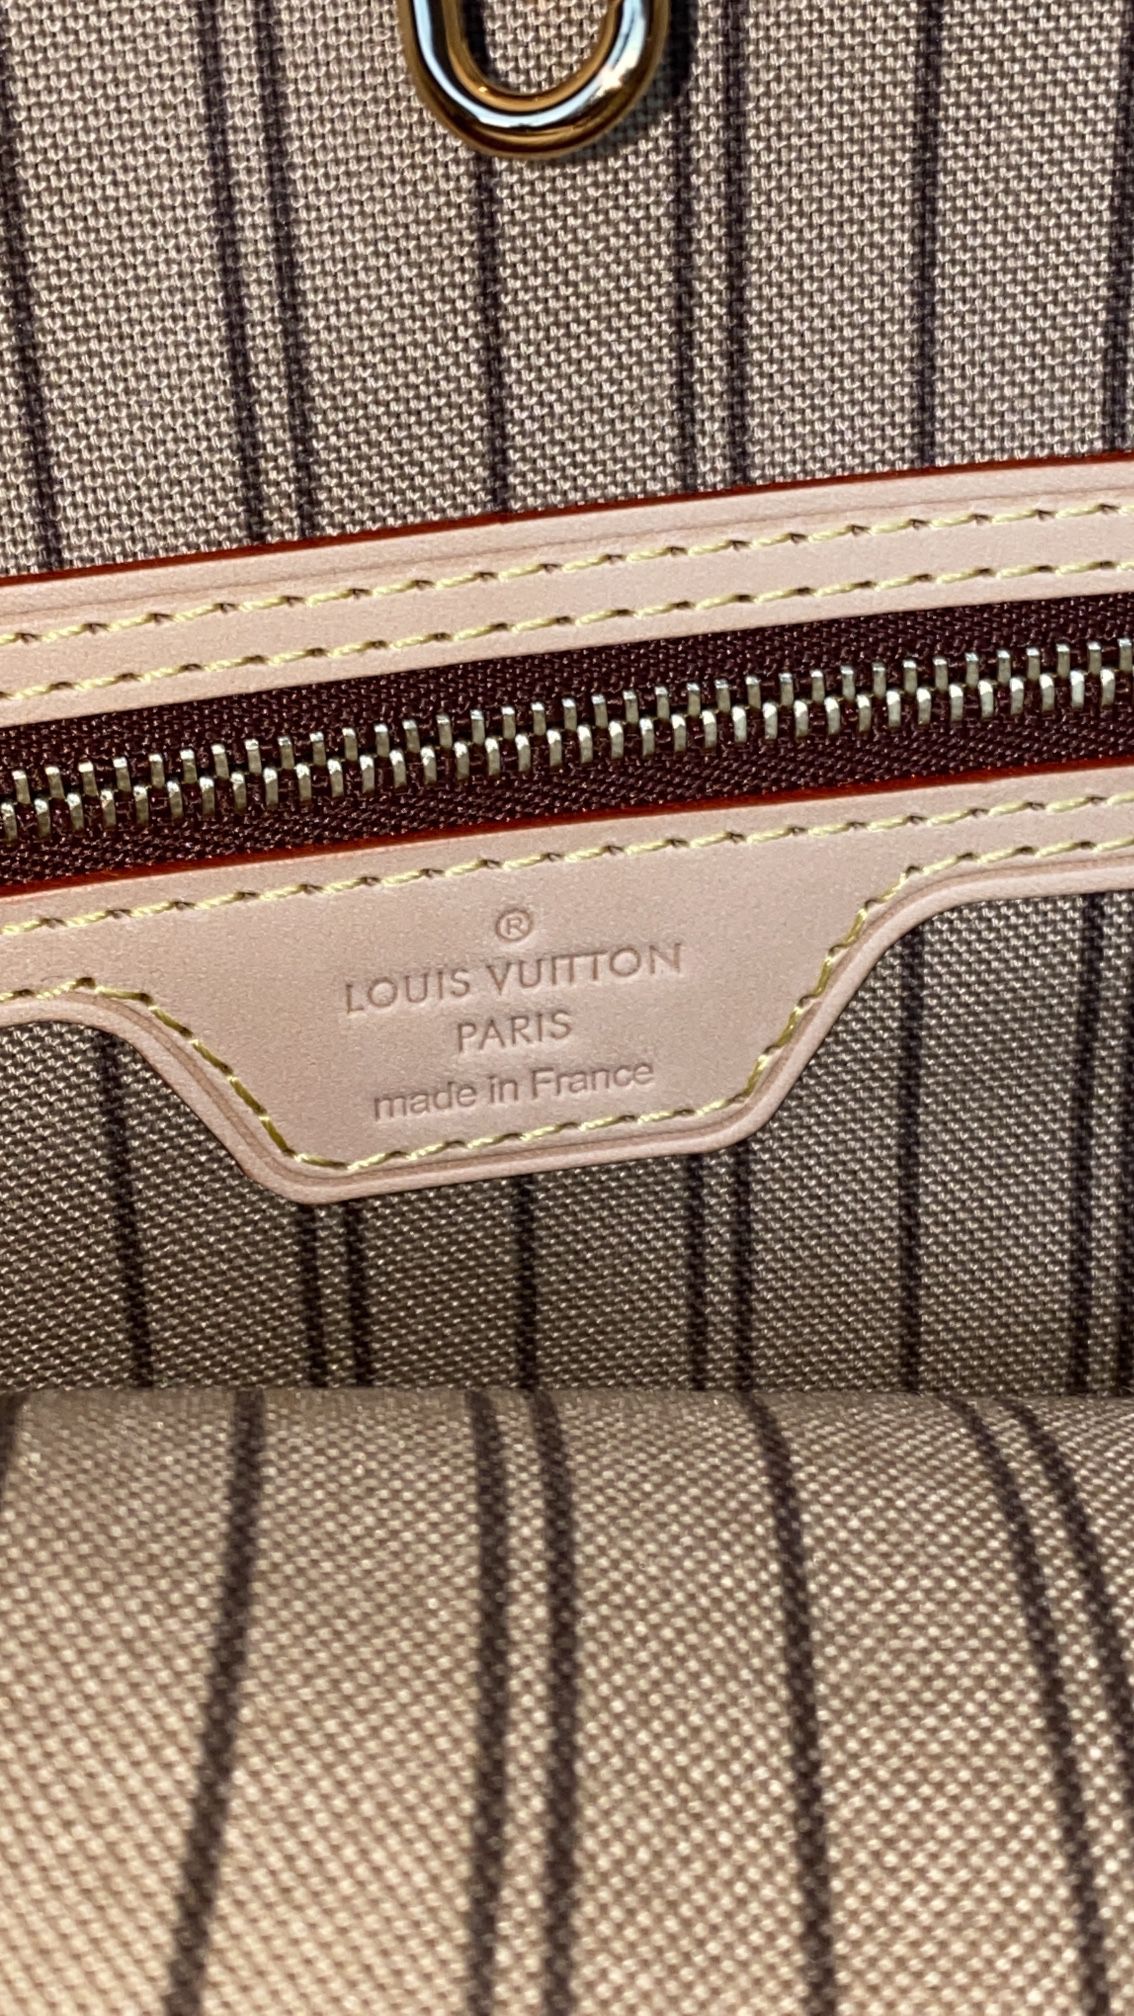 RARE LOUIS VUITTON Deauville Monogram Tuffetage Bag (Collection Prefall)  for Sale in Los Angeles, CA - OfferUp